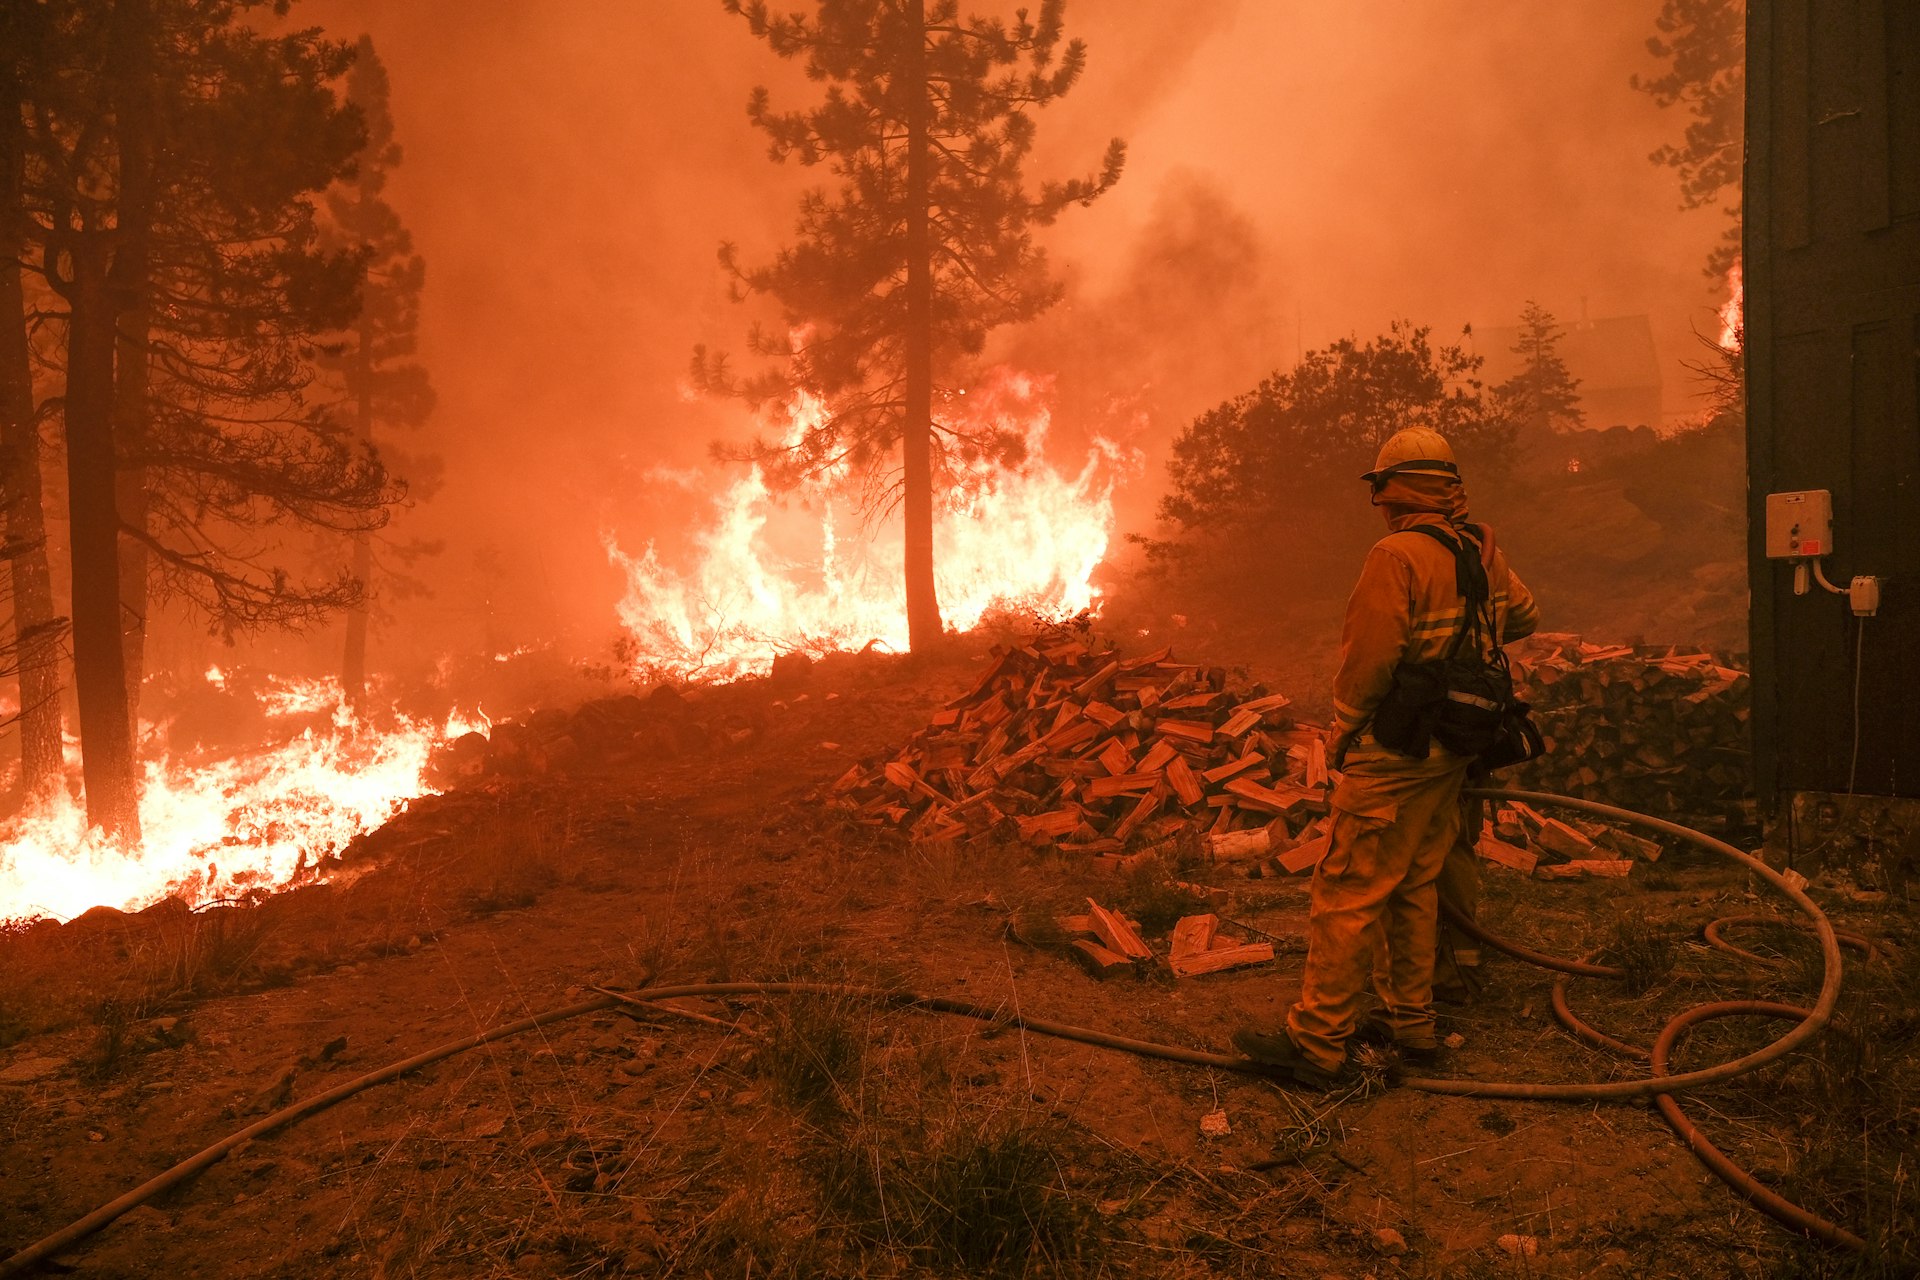 A firefighter monitors a fire threatening the Echo Summit Lodge during the Caldor Fire near Echo Lake, California